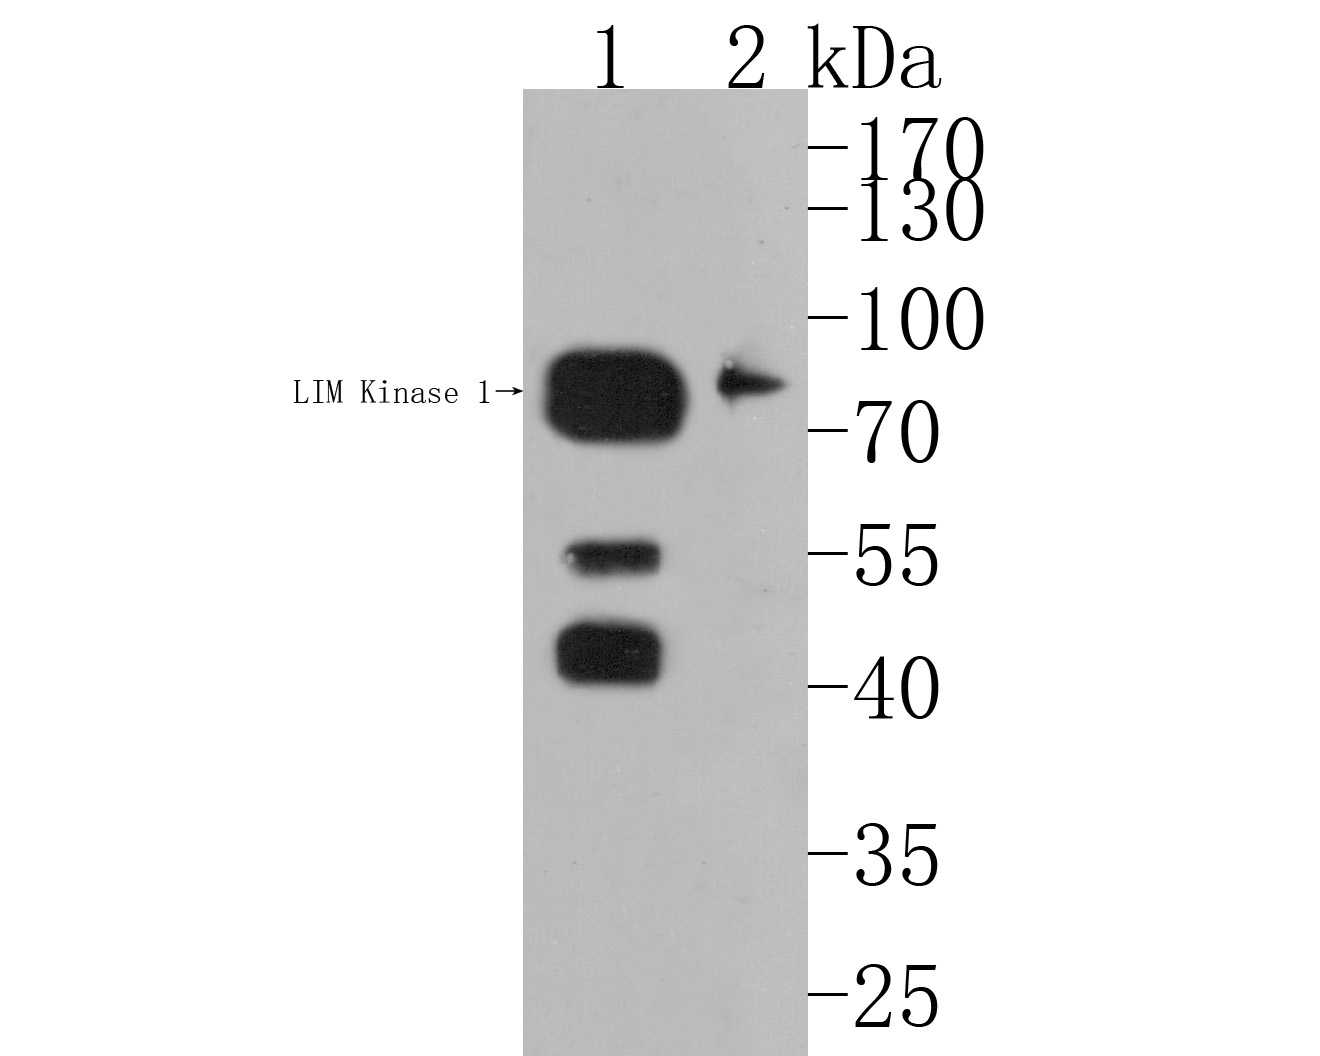 Western blot analysis of LIM Kinase 1 on different lysates. Proteins were transferred to a PVDF membrane and blocked with 5% BSA in PBS for 1 hour at room temperature. The primary antibody (HA500189, 1/500) was used in 5% BSA at room temperature for 2 hours. Goat Anti-Rabbit IgG - HRP Secondary Antibody (HA1001) at 1:200,000 dilution was used for 1 hour at room temperature.<br />
Positive control: <br />
Lane 1: Mouse lung tissue lysate<br />
Lane 2: Rat stomach tissue lysate